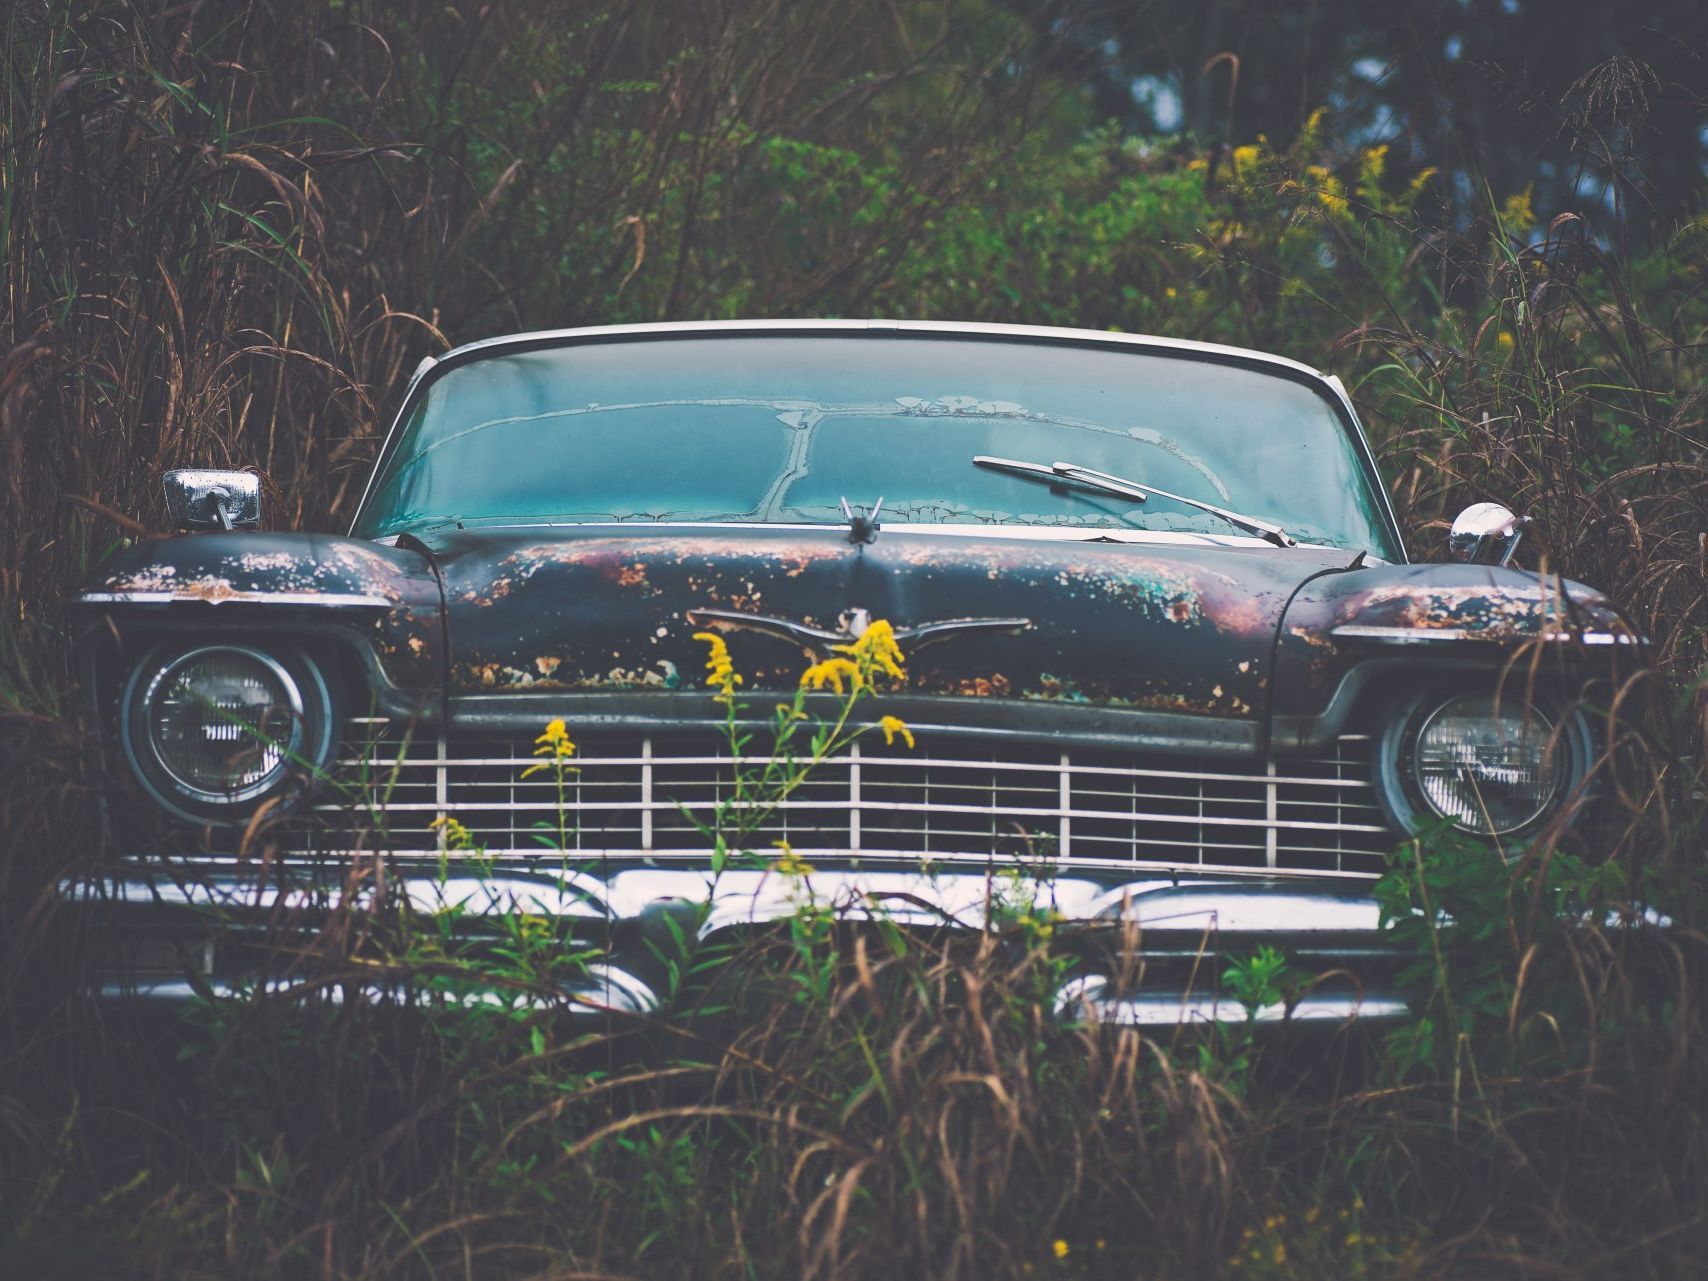 An old rusty car is parked in a field of tall grass.